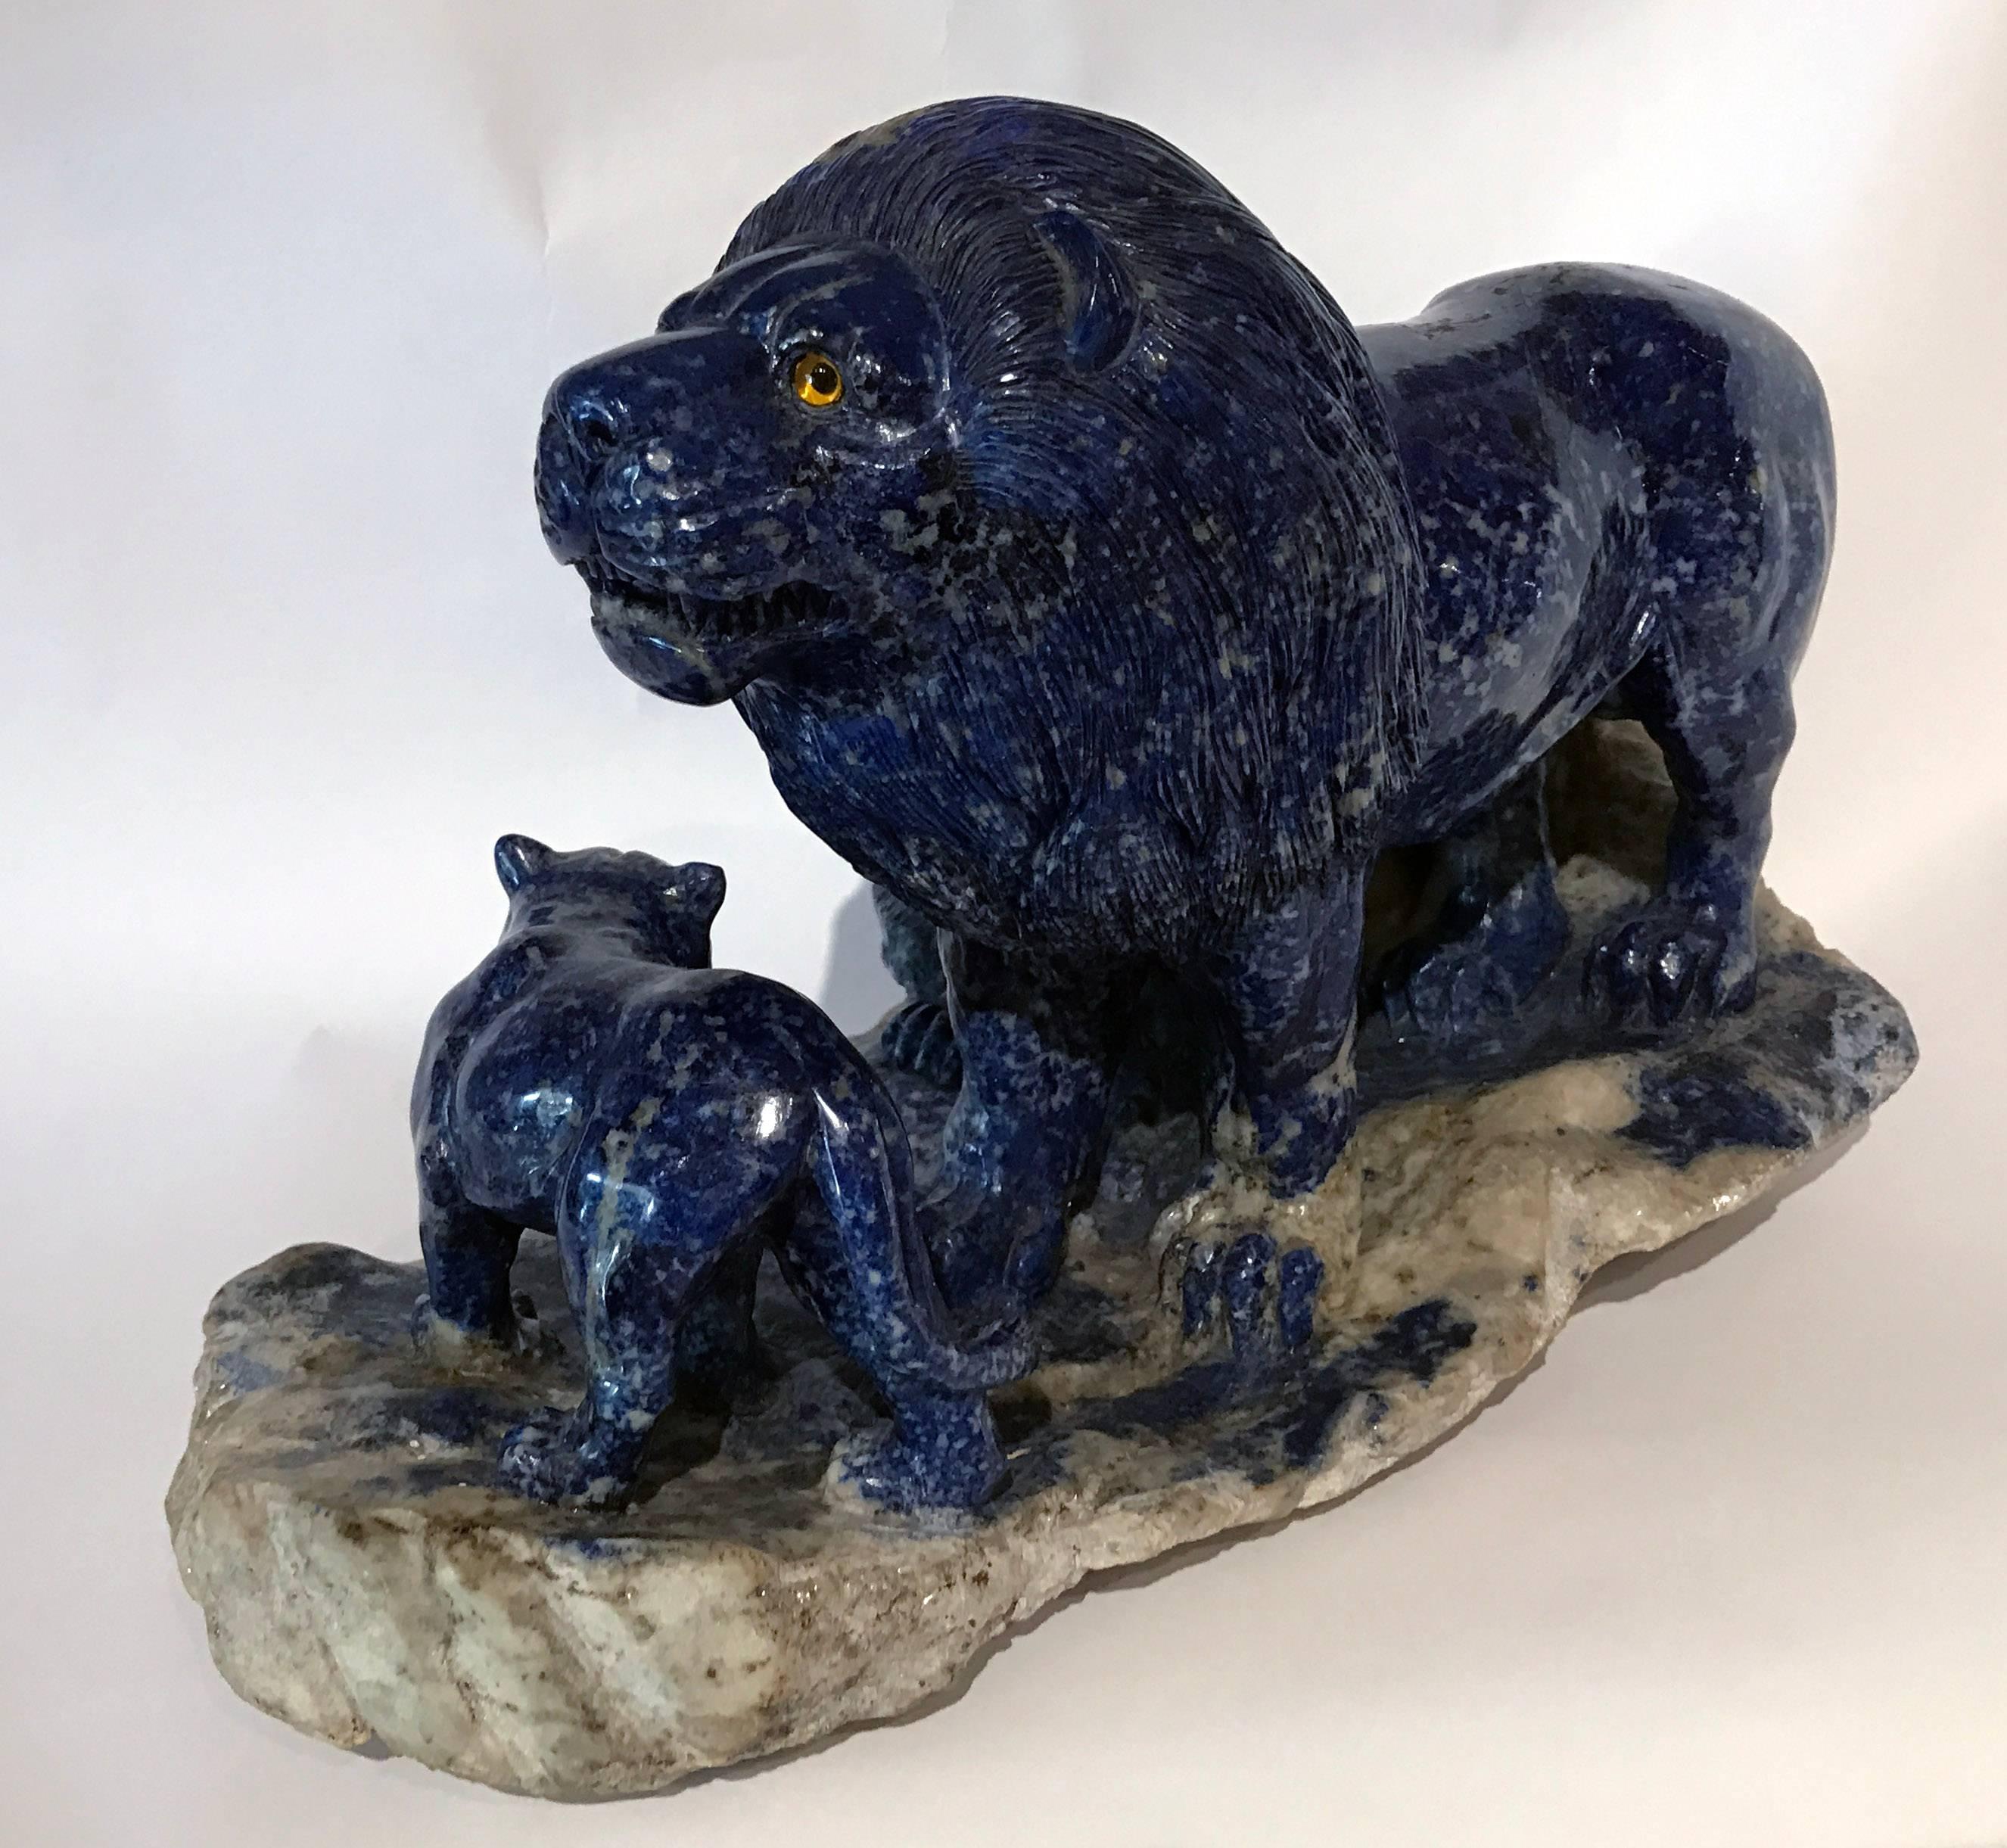 A group of animal life, the lions family. Carved from an unique block of Lapis Lazuli, a semi-precious stone prized since antiquity for its intense color. At the end of the Middle Ages, lapis lazuli began to be exported to Europe, where it was